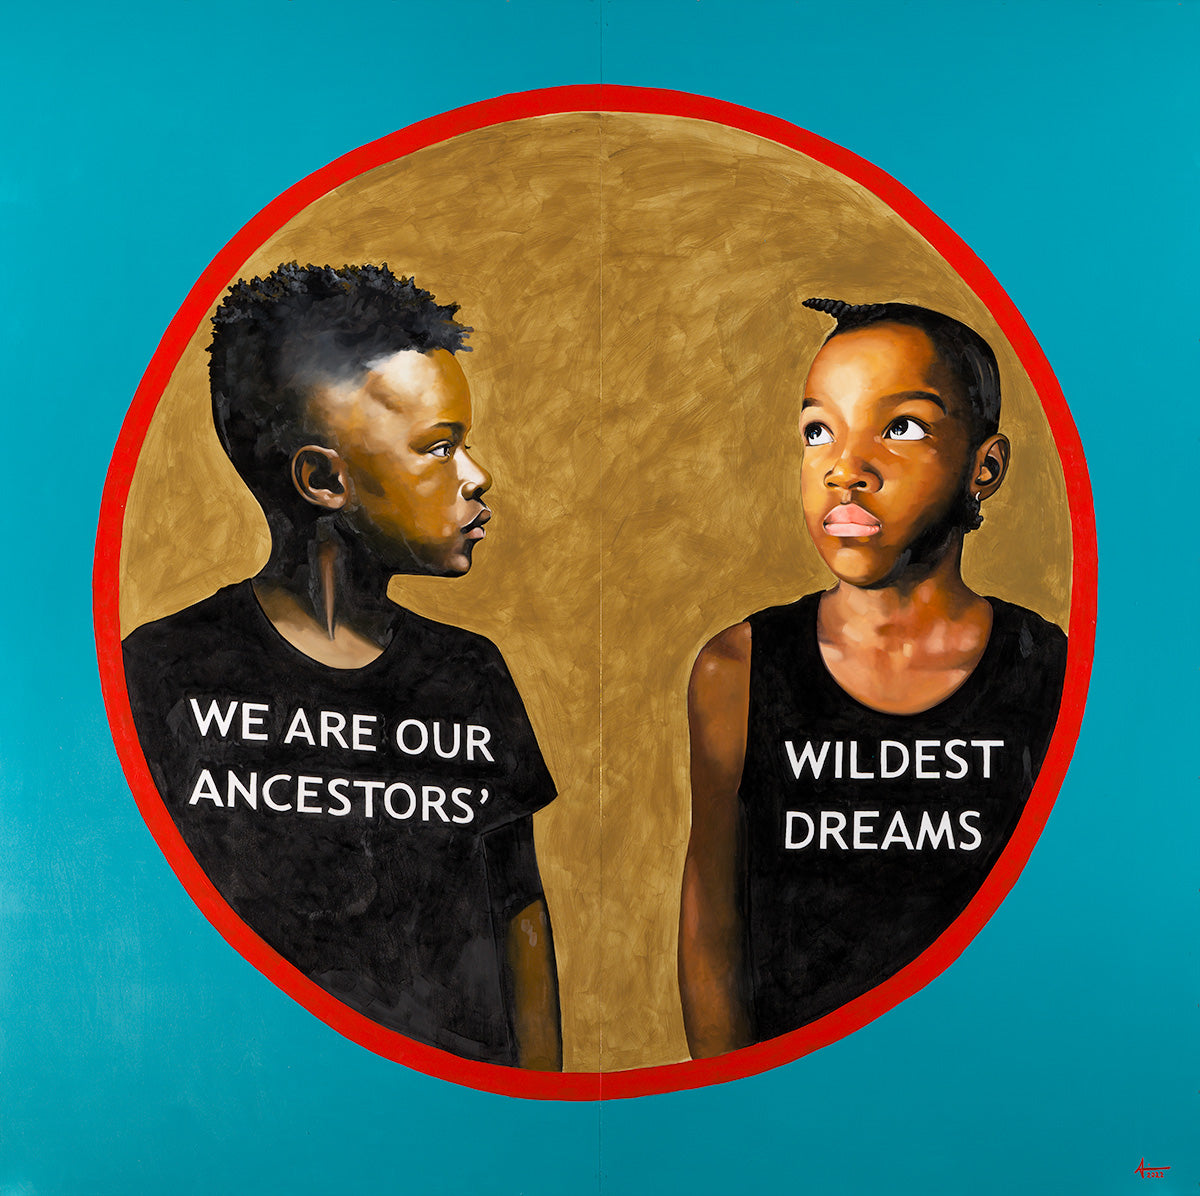 POSTER - ADRIENNE BROWN DAVID's MURAL - WE ARE OUR ANCESTORS